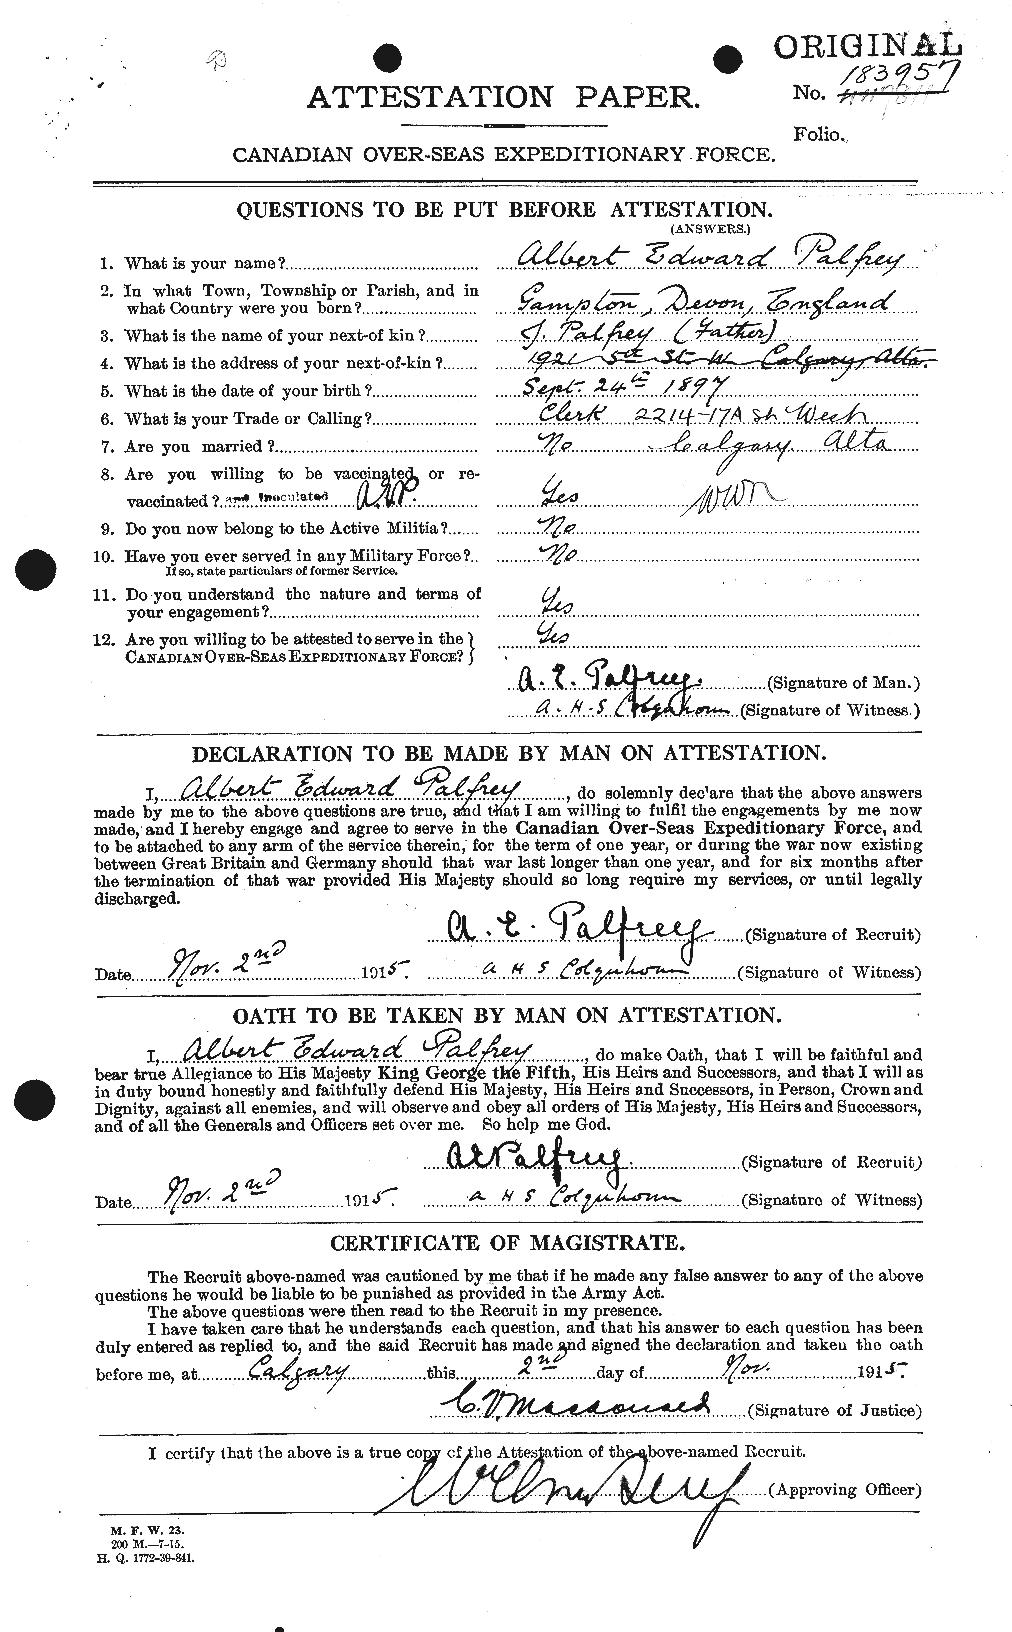 Personnel Records of the First World War - CEF 562626a